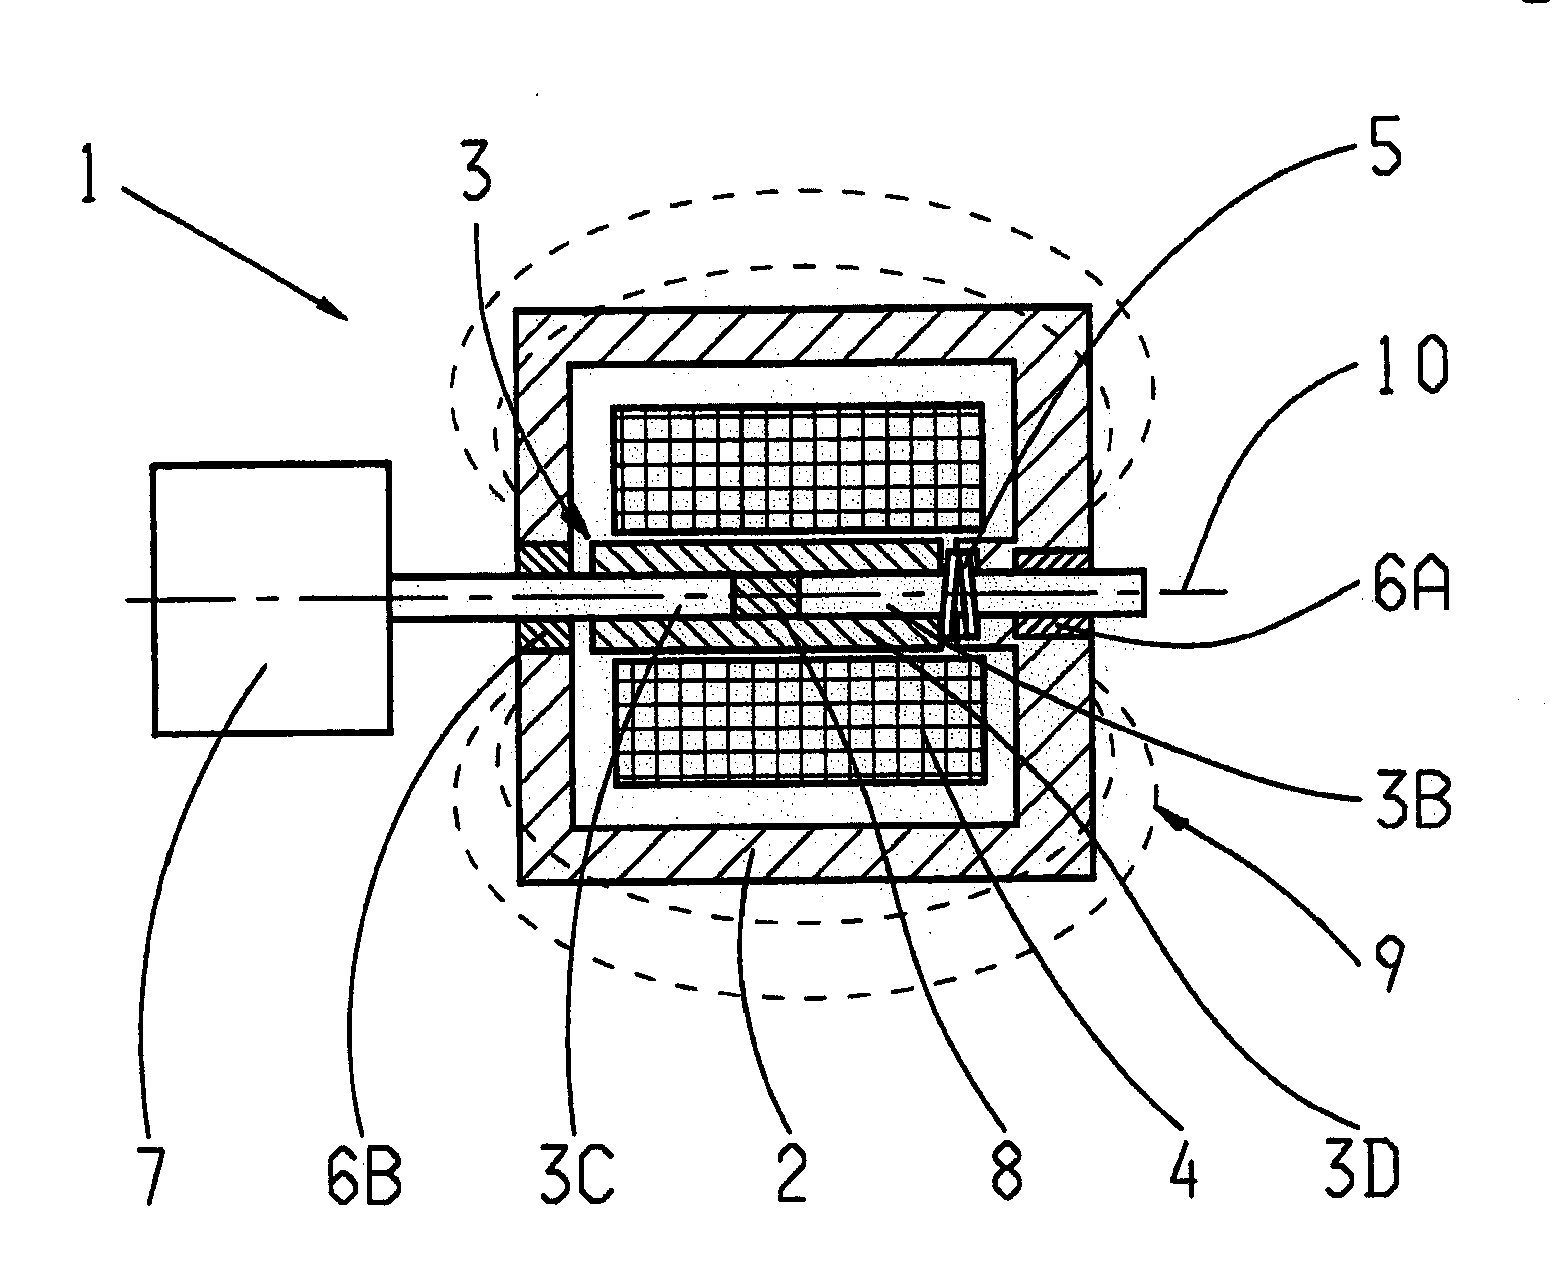 Electromagnetic actuator having a magnetostrictive element and method for operating the electromagnetic actuator